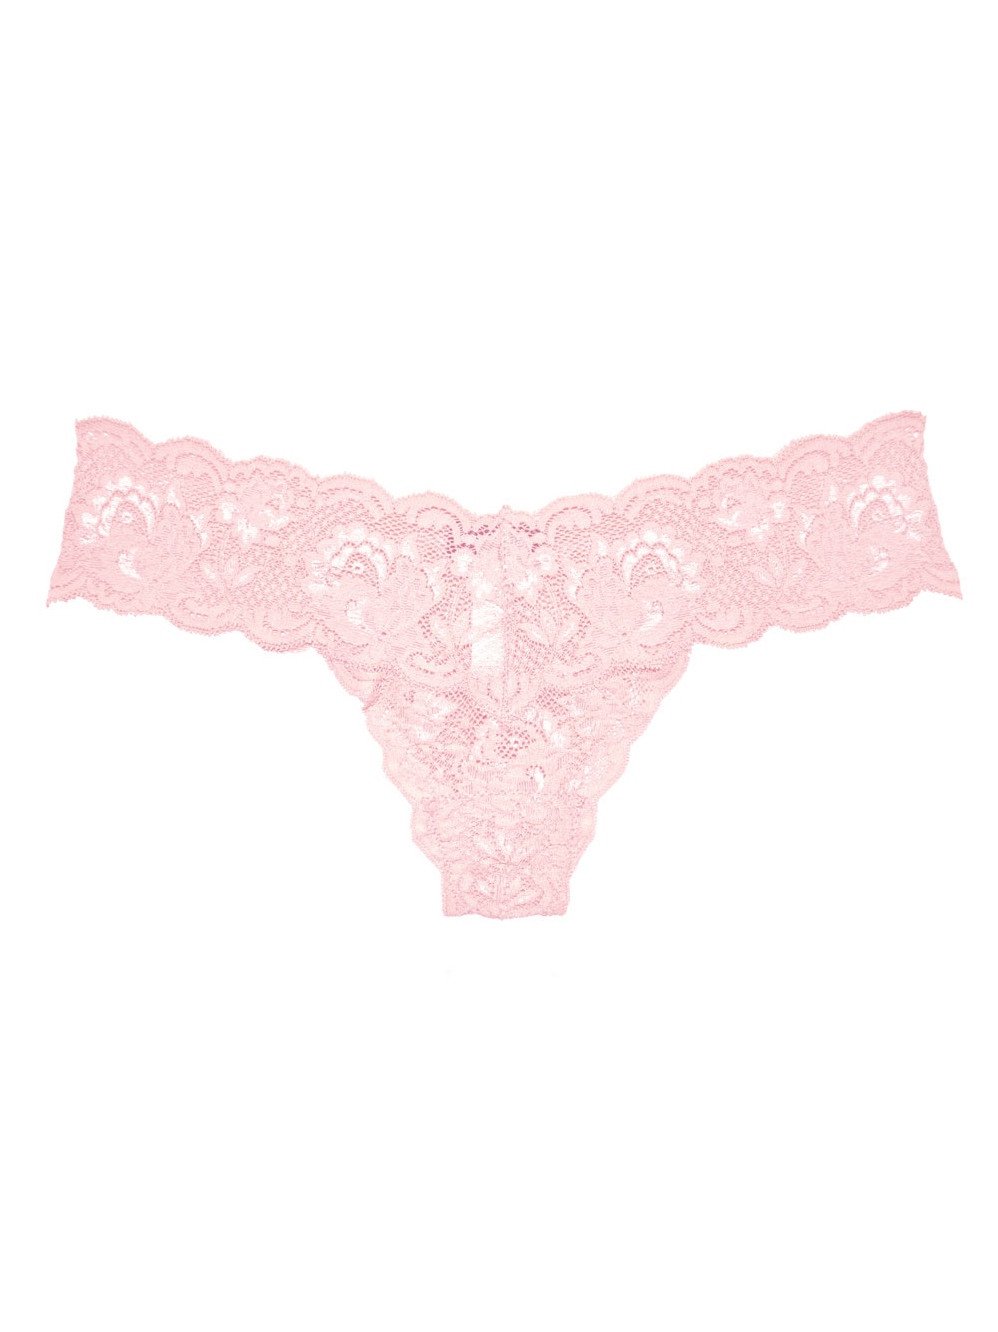 COSABELLA Never Say Never CUTIE Low Rise Thong | HauteFlair